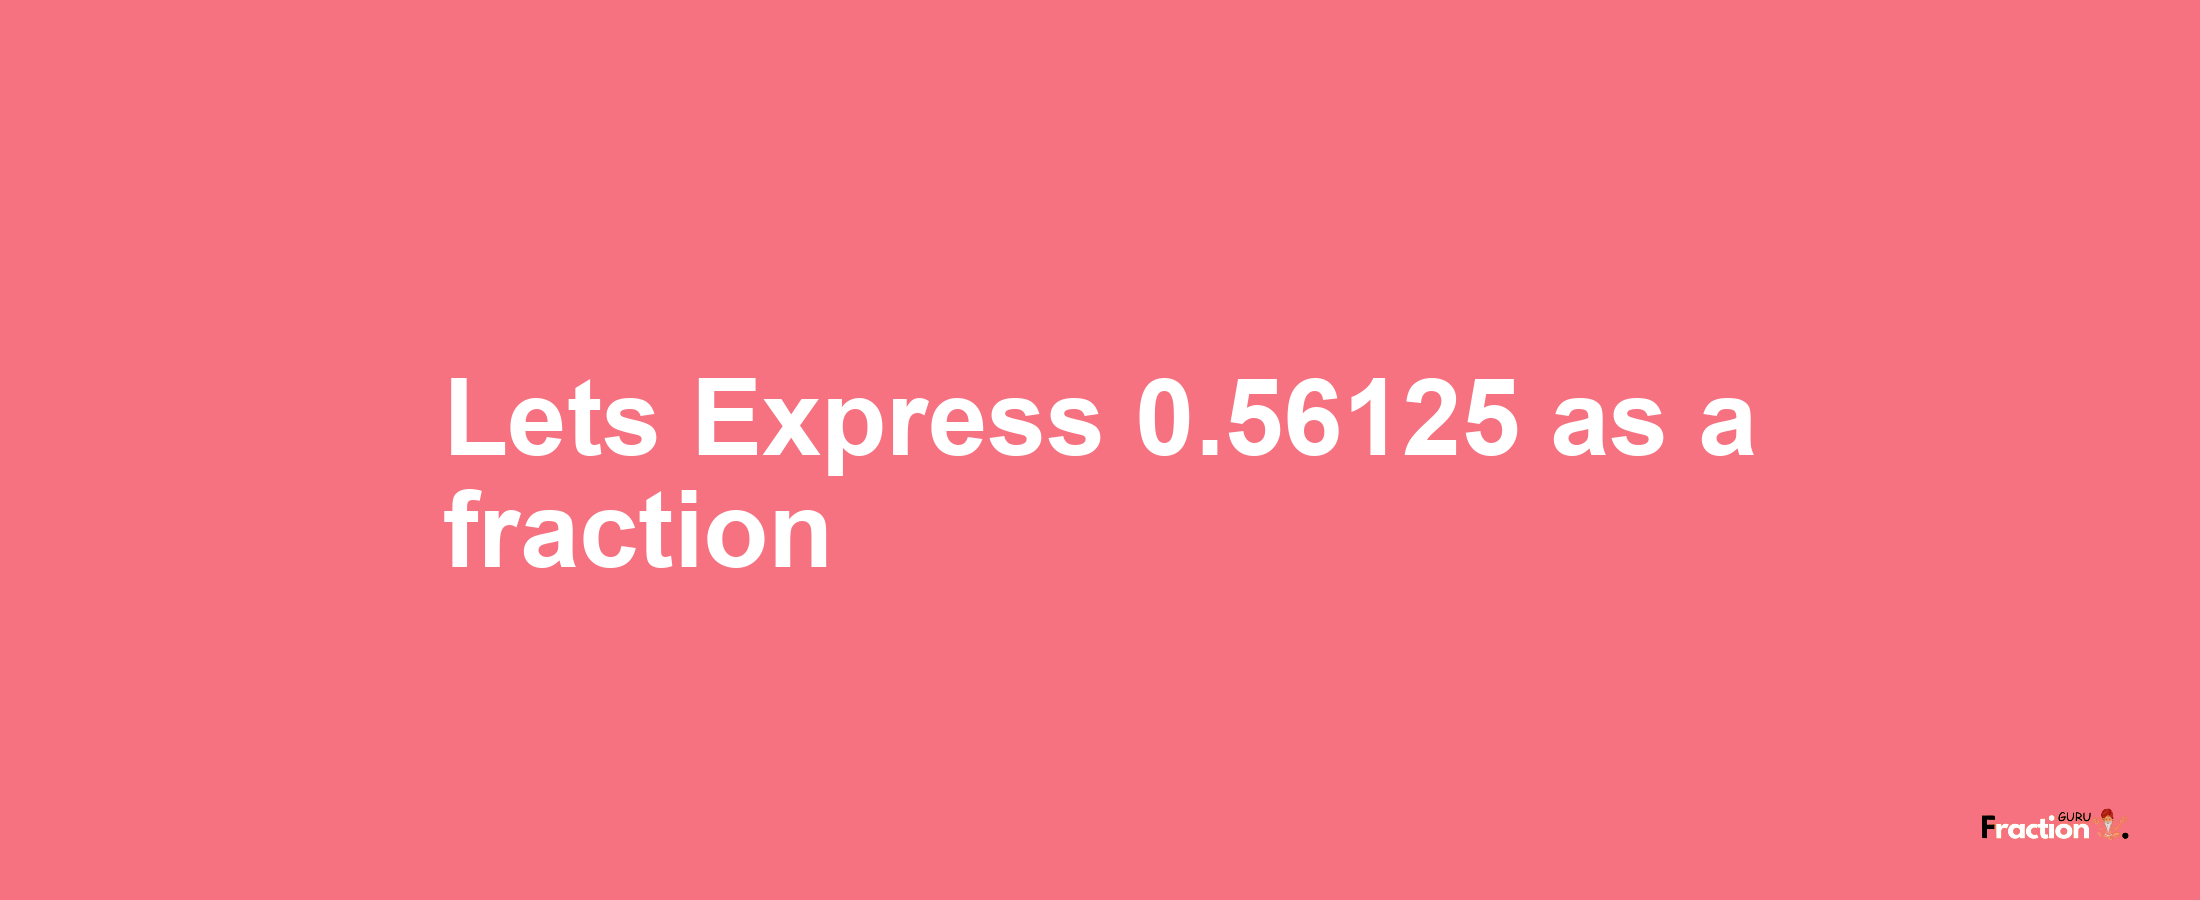 Lets Express 0.56125 as afraction